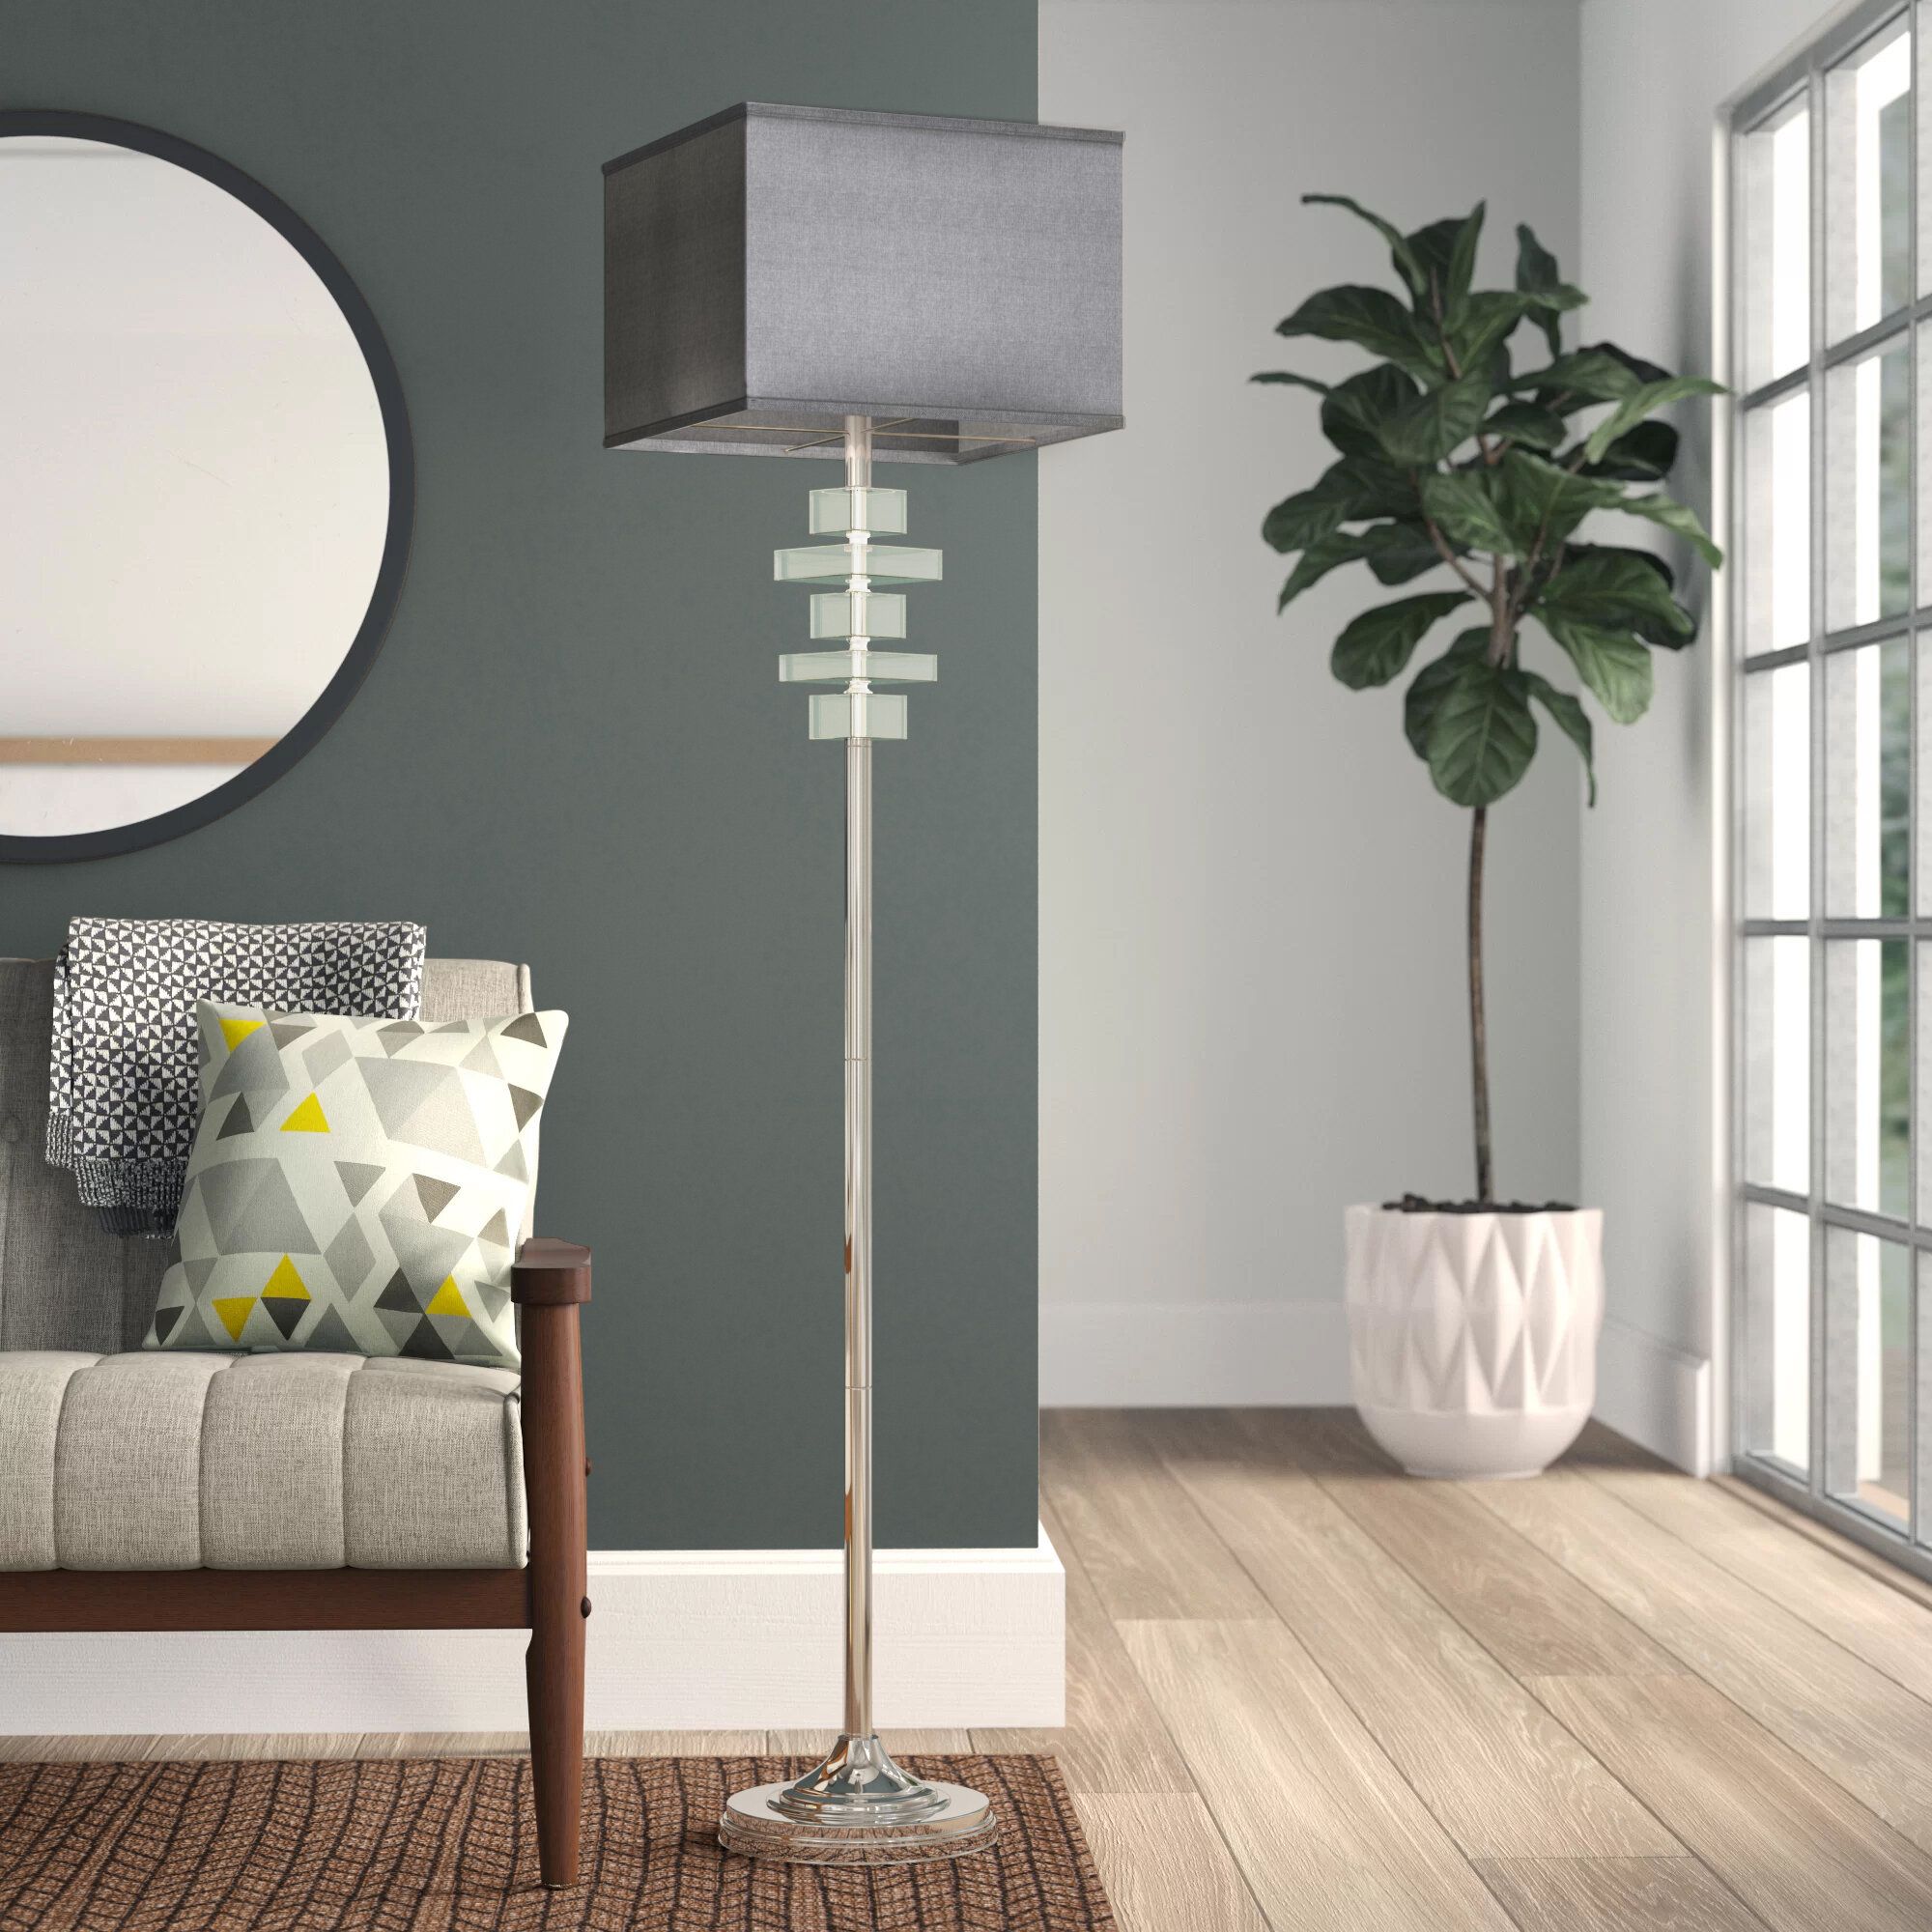 Wayfair | Gray Shade Floor Lamps You'll Love In 2023 With Regard To Grey Shade Floor Lamps (View 2 of 15)